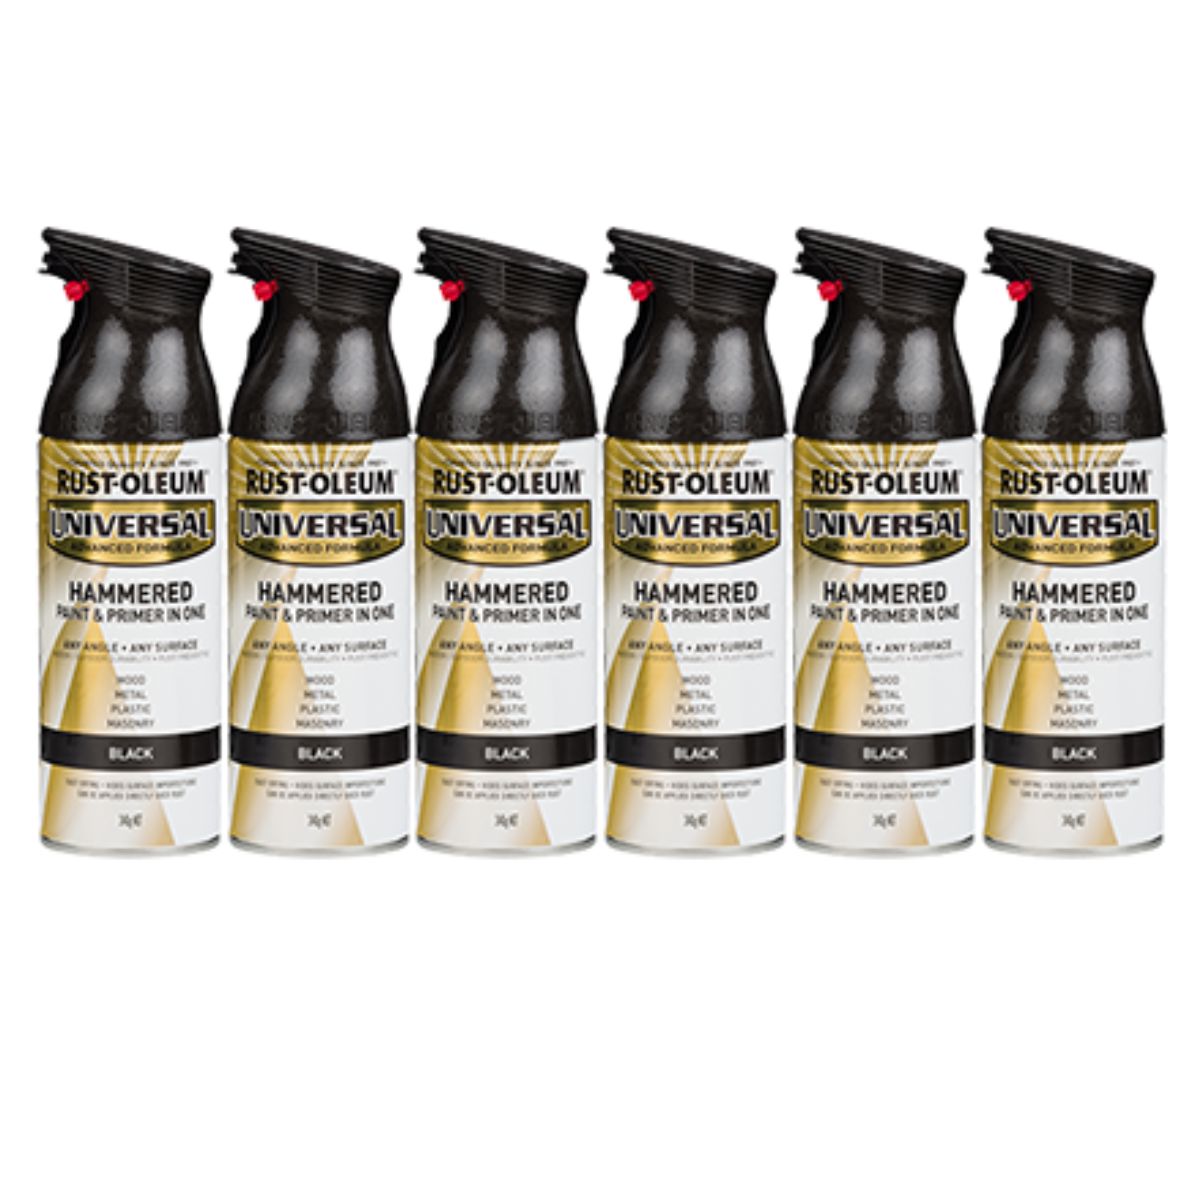 6 cans | Rustoleum 250373 UNIVERSAL® Hammered Spray Paint | HAMMERED BLACK - South East Clearance Centre